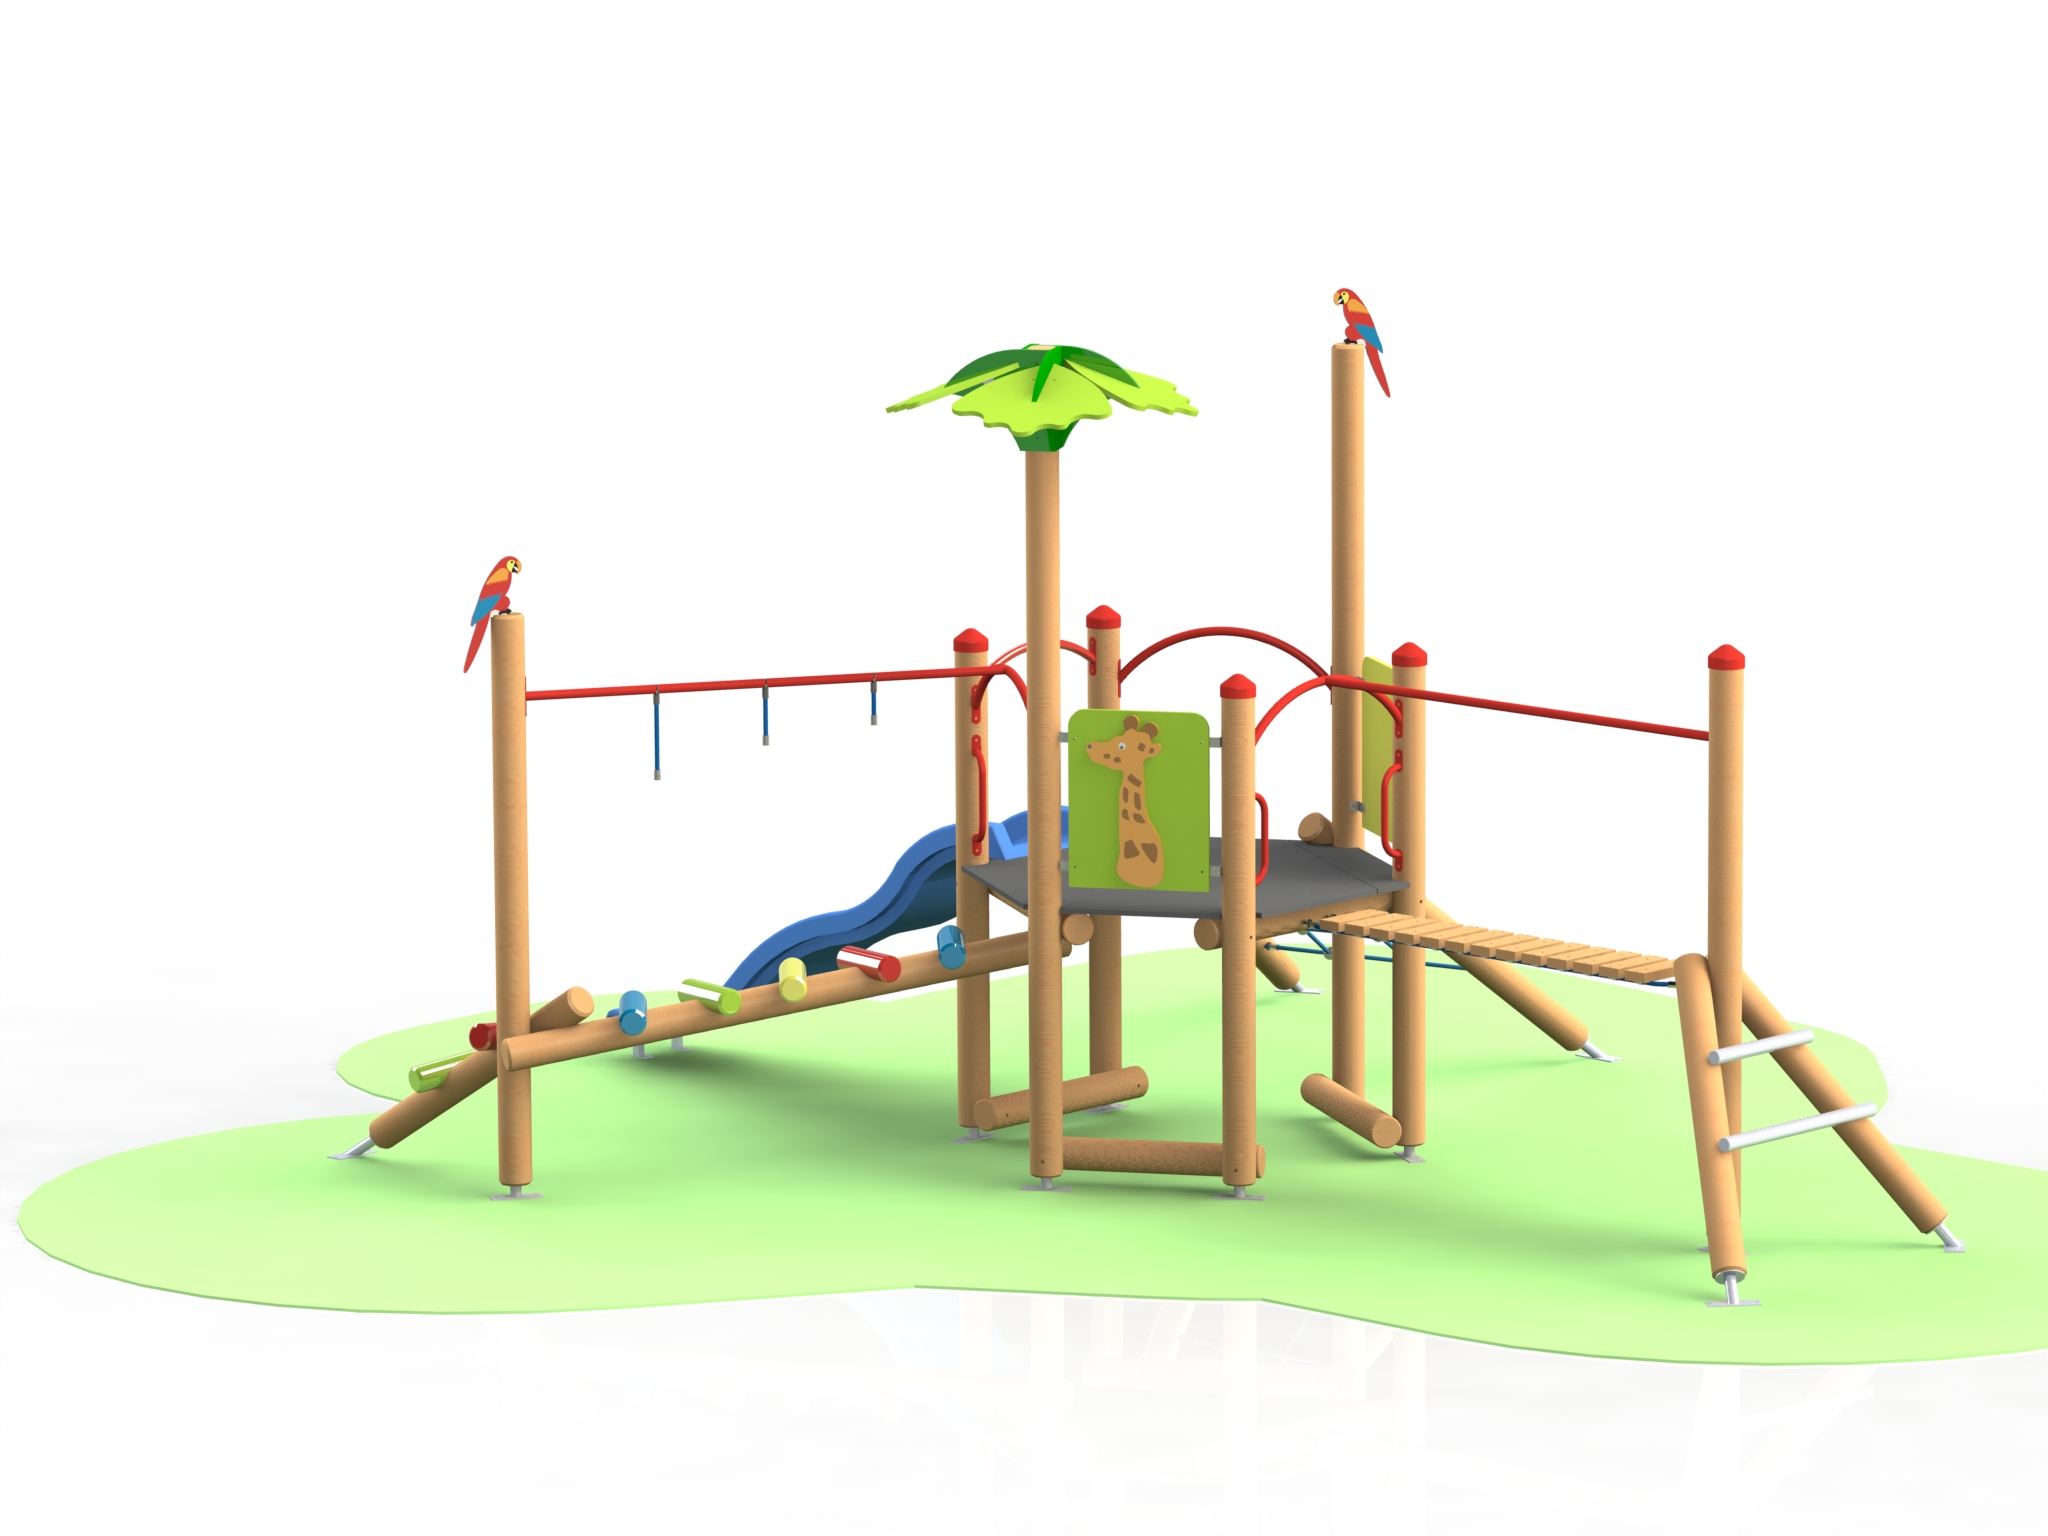 Combined children play facility, Г36 model